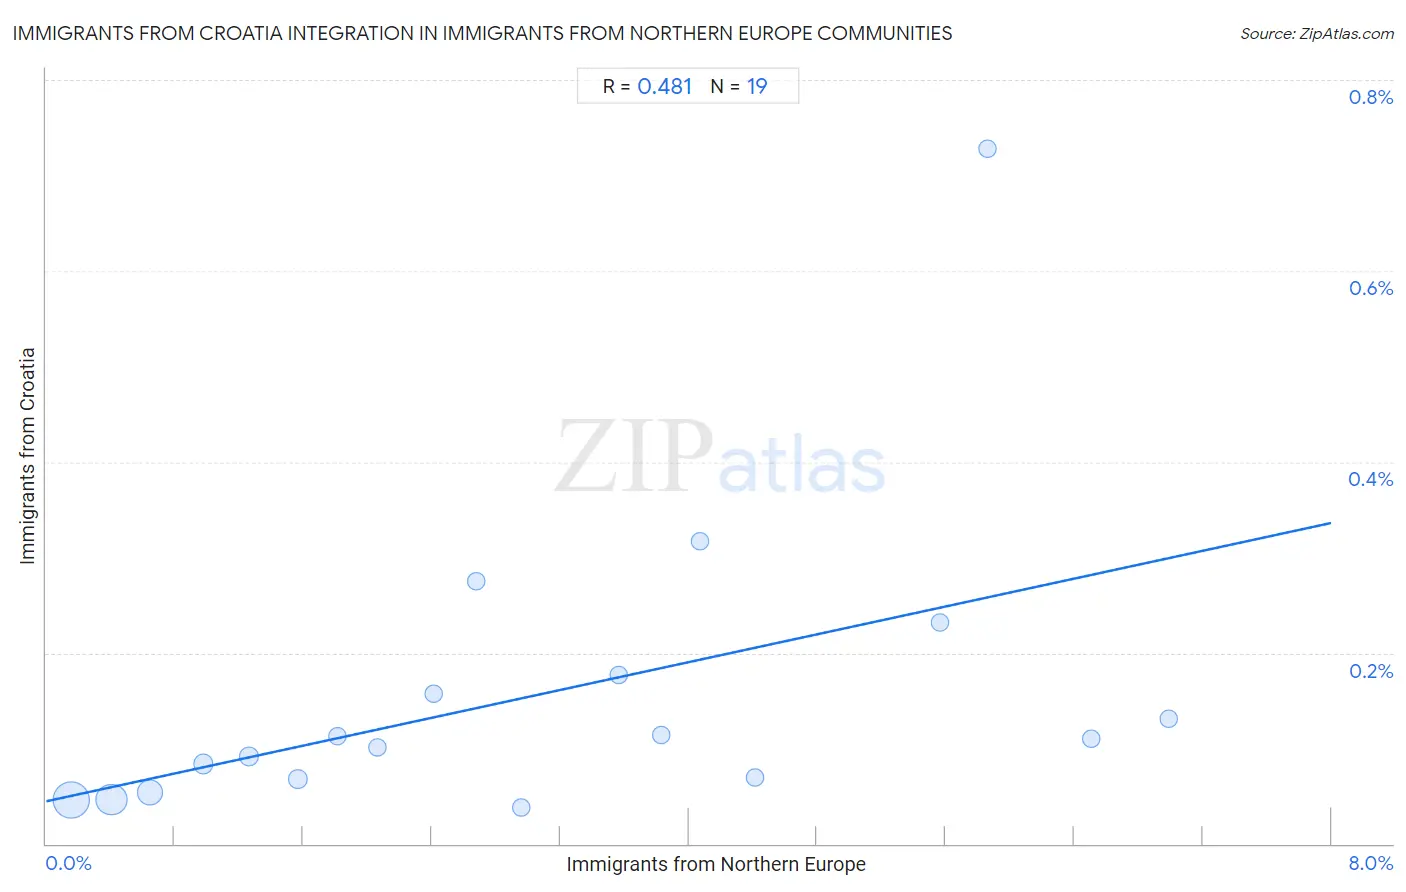 Immigrants from Northern Europe Integration in Immigrants from Croatia Communities